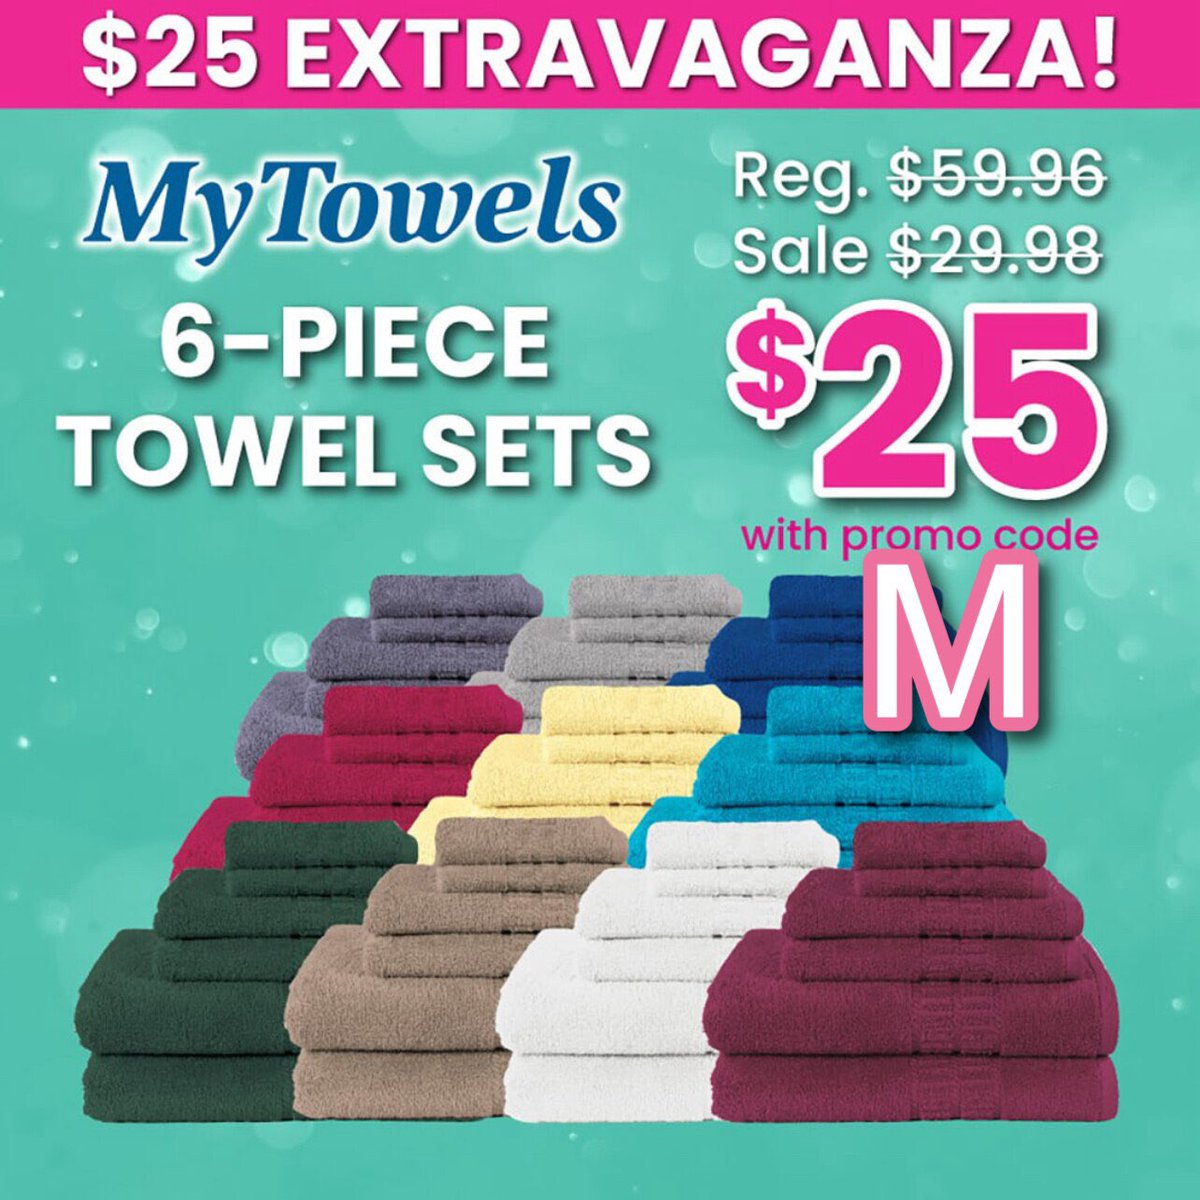 $25 Extravaganza! #MyPillow #MyTowels™ 6-Piece Towel Set just $25 when you use promo code 👉M👈. They are soft AND absorbent! “Towels that work, what a concept!” Plus get free shipping on orders over $75! mypillow.com/bath #MyPillowPromoCodeM